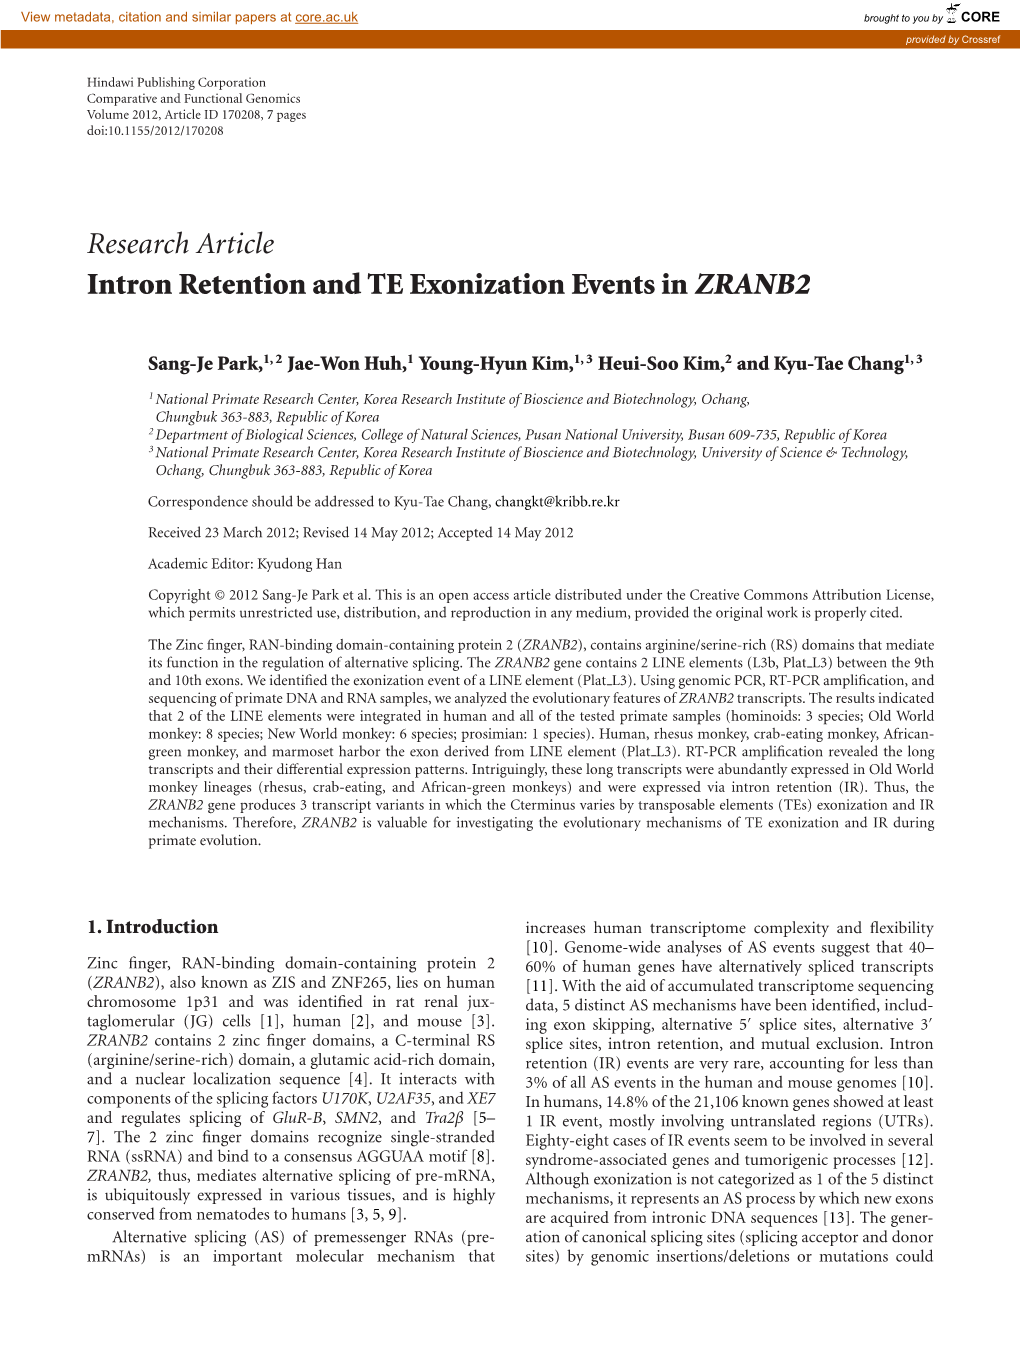 Research Article Intron Retention and TE Exonization Events in ZRANB2